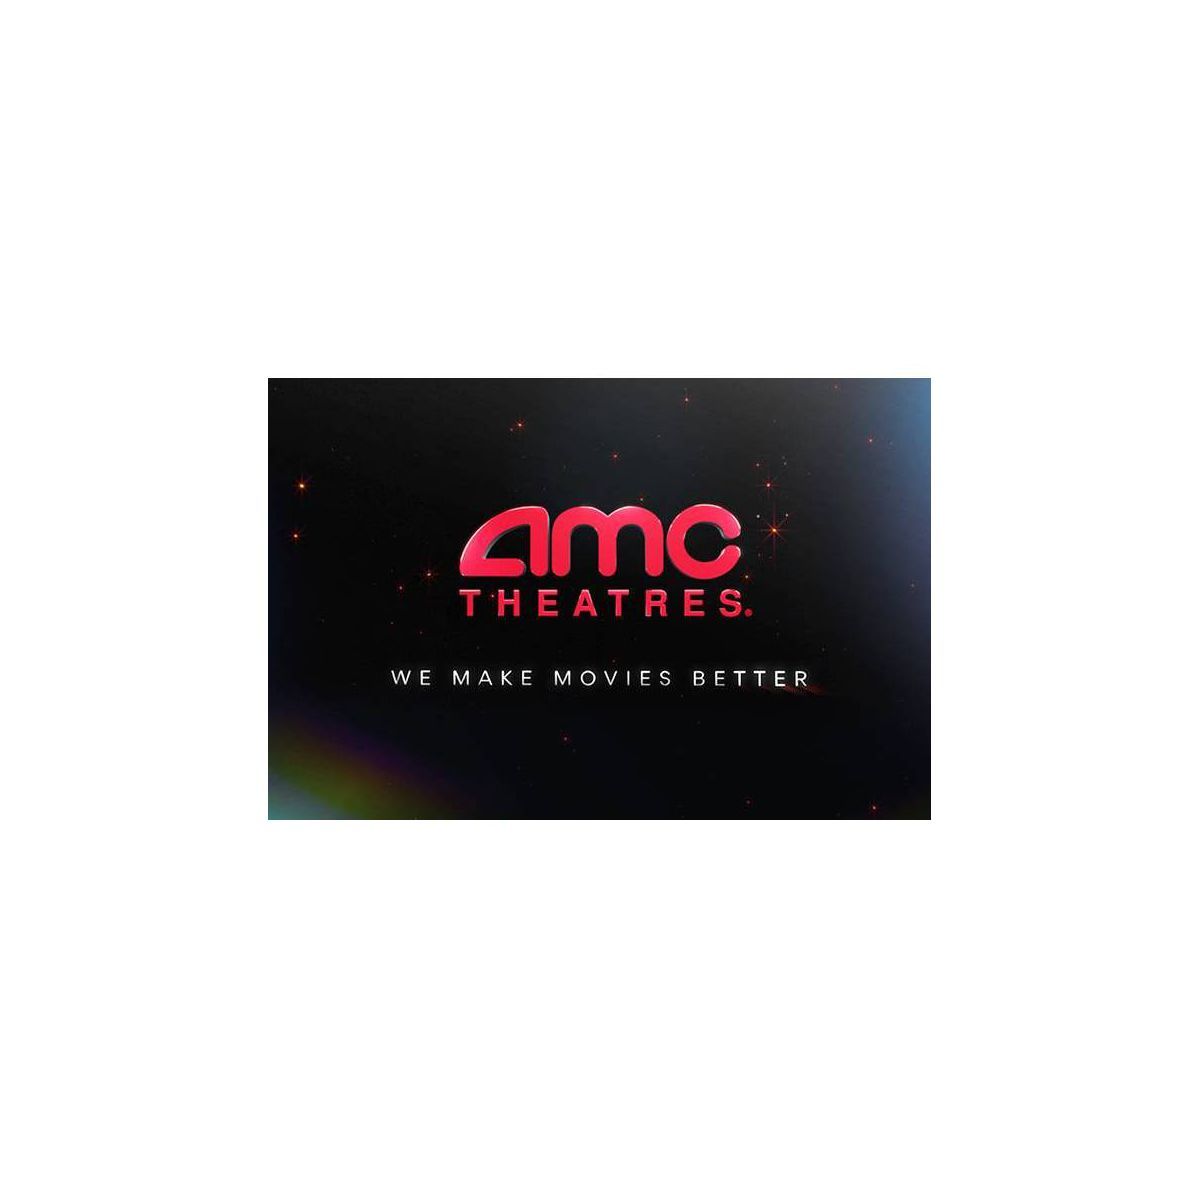 AMC Gift Card (Email Delivery) | Target